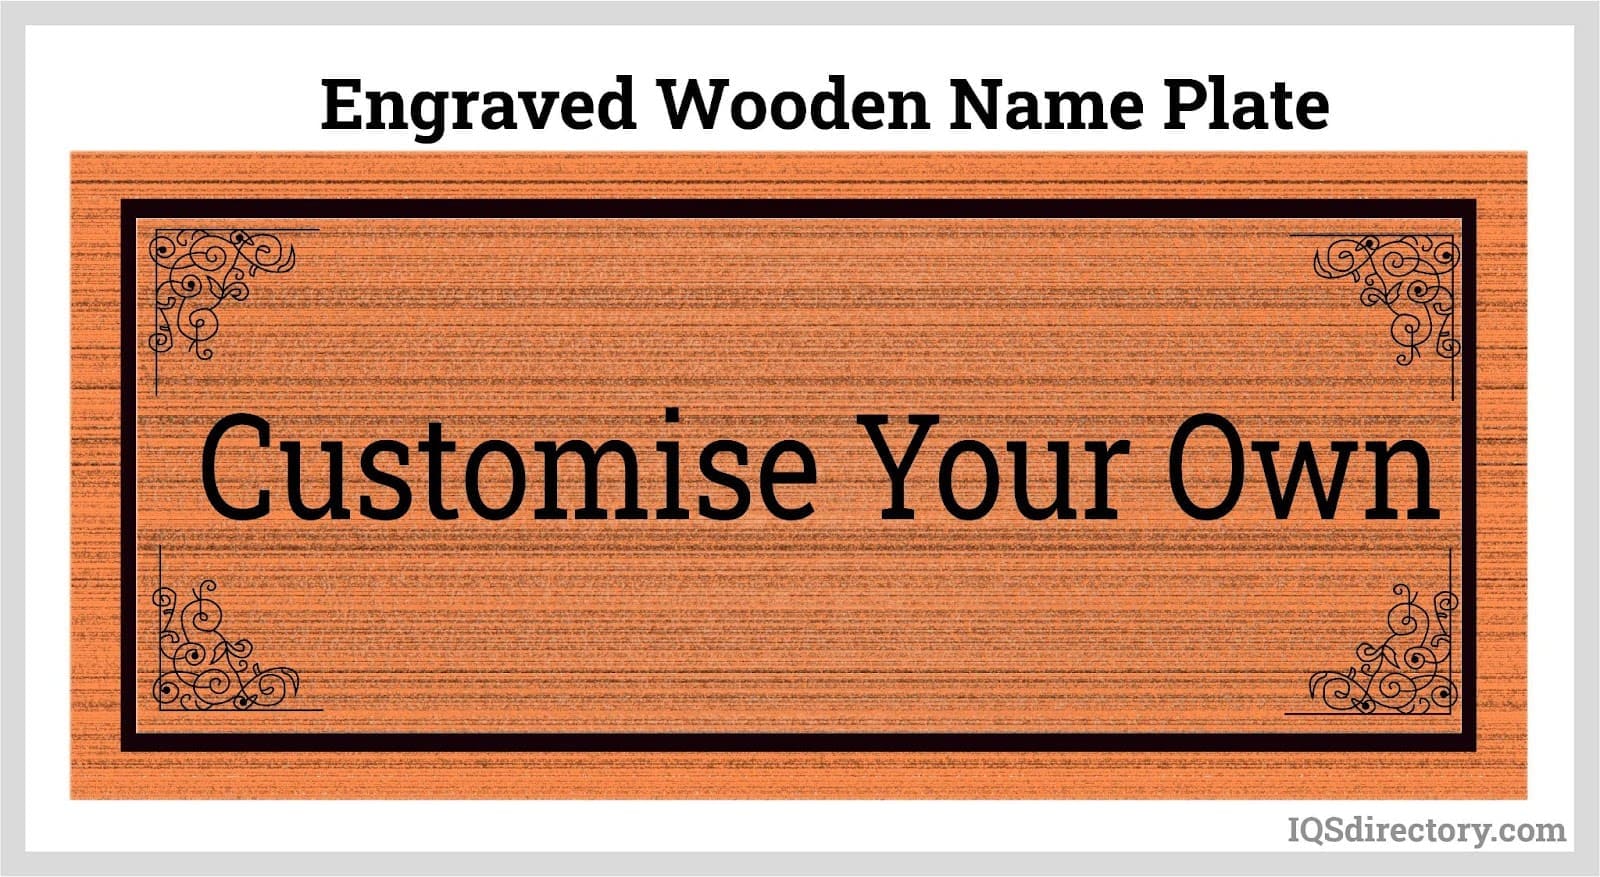 Engraved Wooden Name